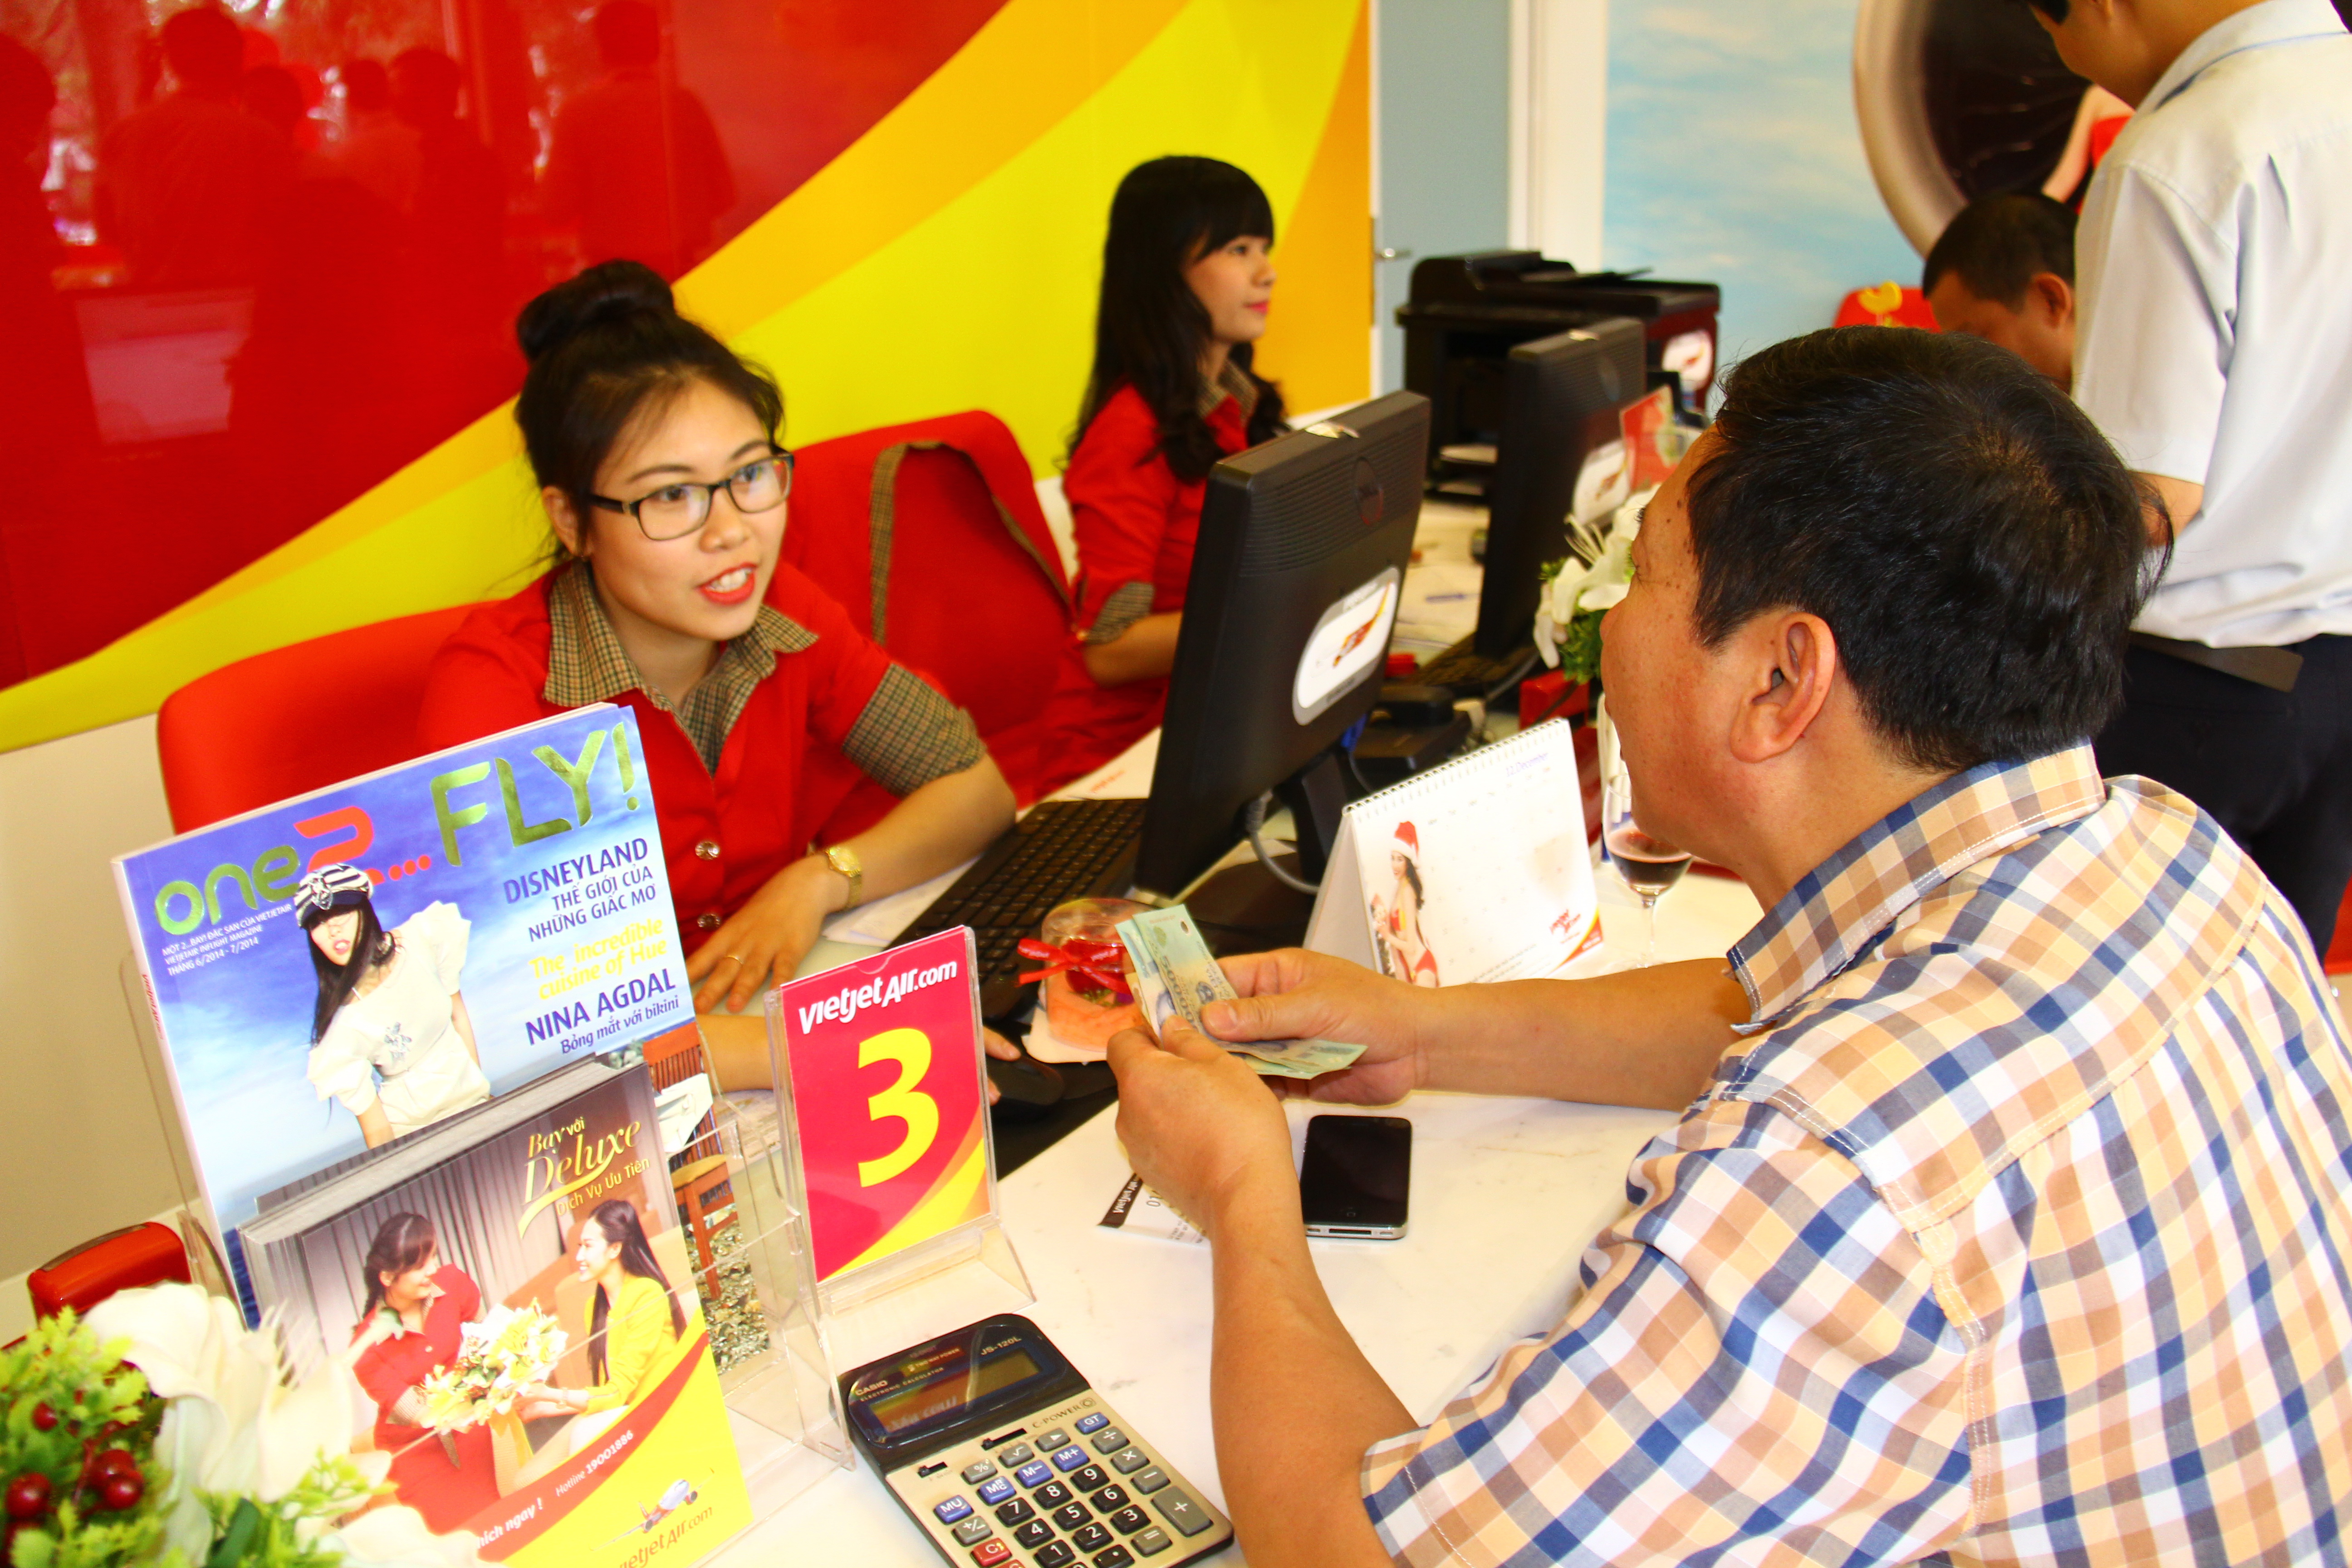 For a month, travelers can snap up airfares for zero dong with Vietjet